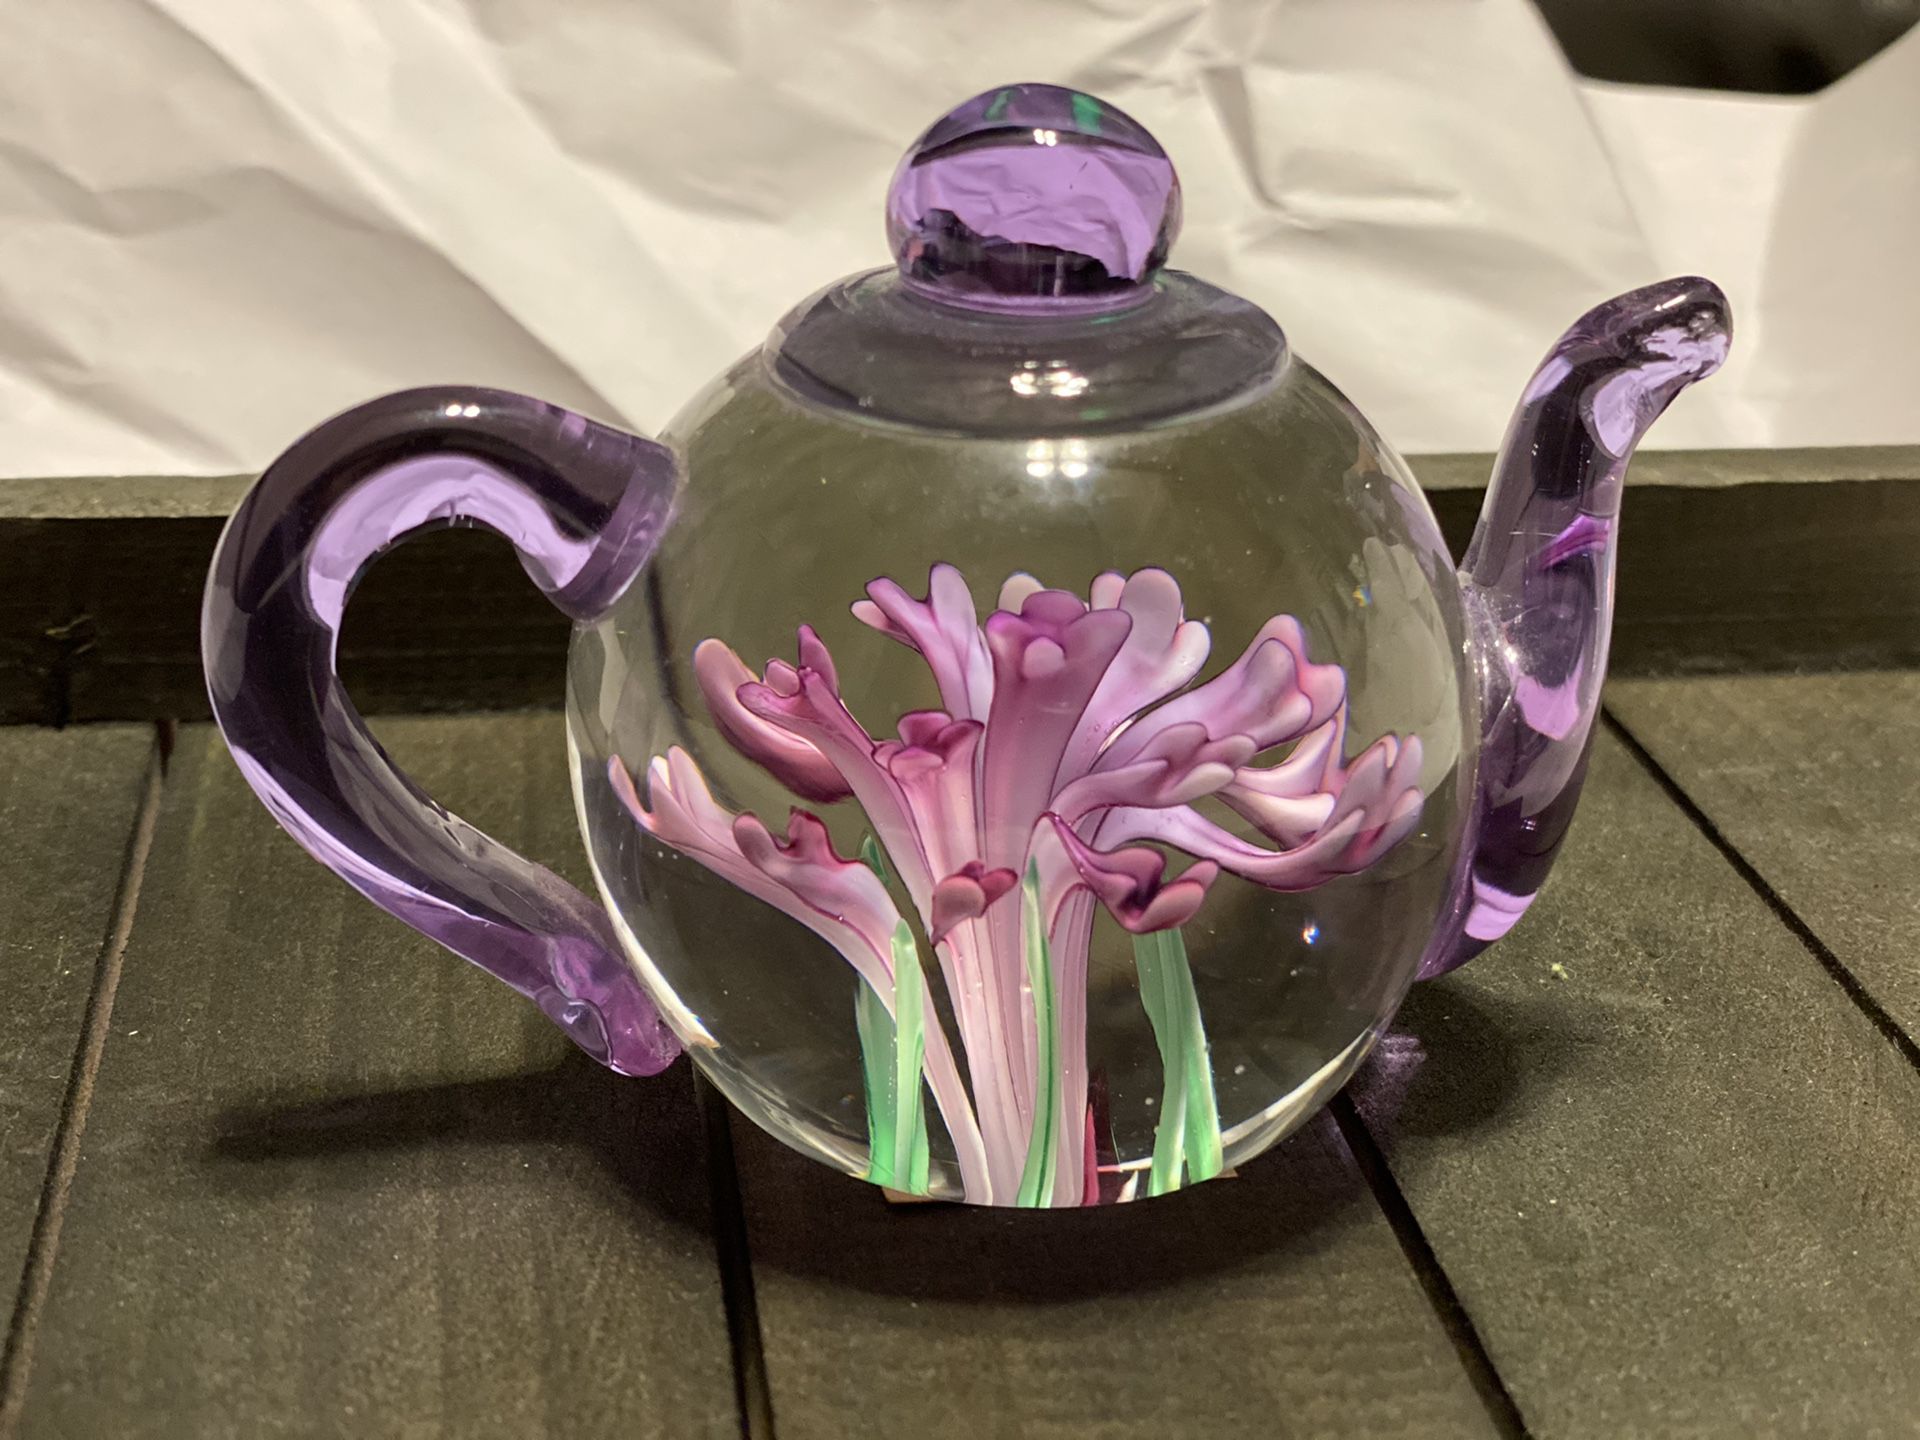 Dynasty Gallery Heirloom Collectibles Teapot Paperweight. Iris Flower and Lavender Handle 3.75" tall x 4.75" wide. $10